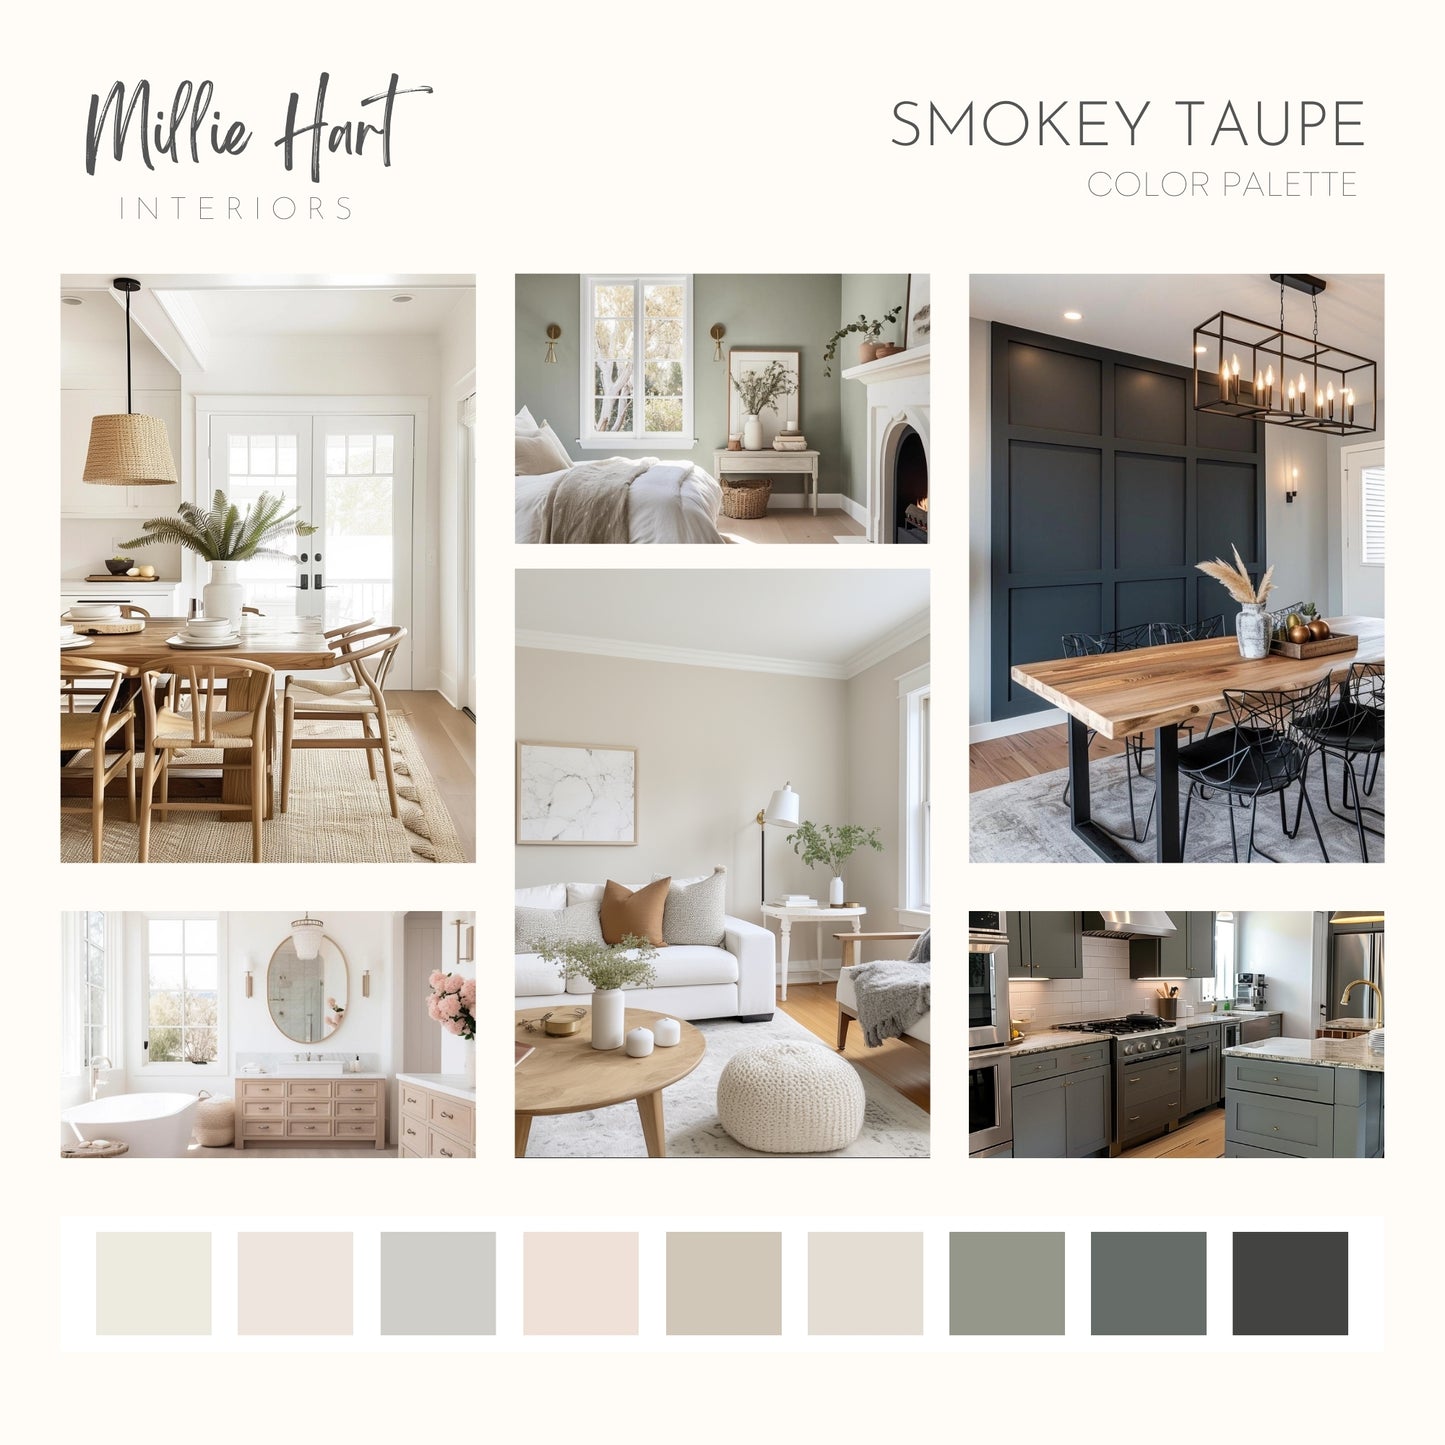 Smokey Taupe Benjamin Moore Paint Palette, Modern Neutral Interior Paint Colors for Home, Smokey Taupe Compliments, Warm Whites, Fog Mist